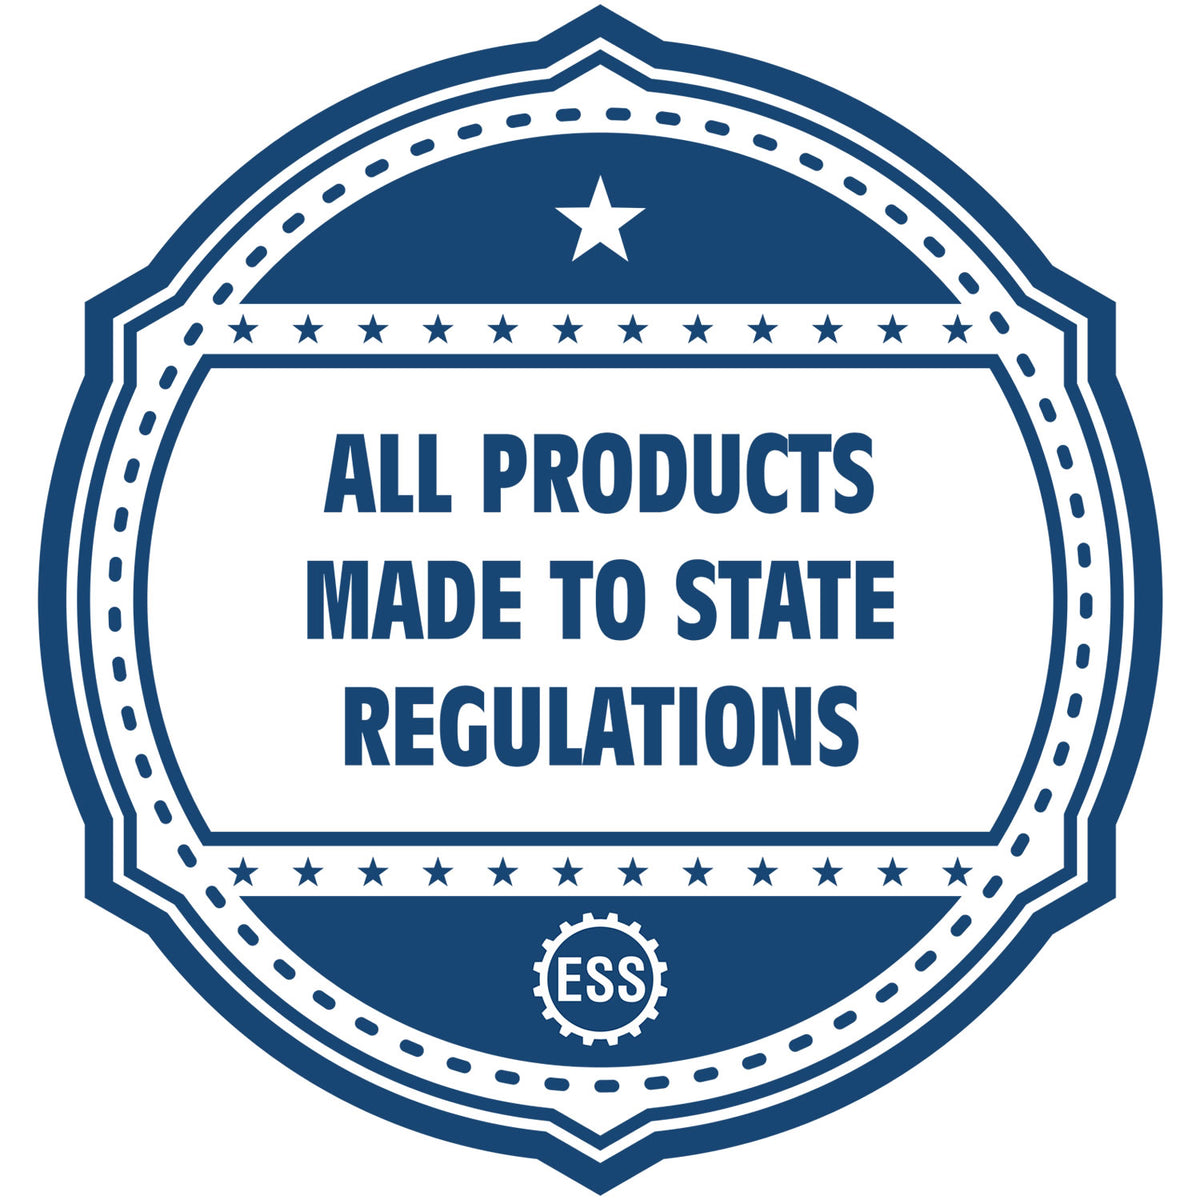 A blue icon or badge for the Hybrid Minnesota Engineer Seal showing that this product is made in compliance with state regulations.